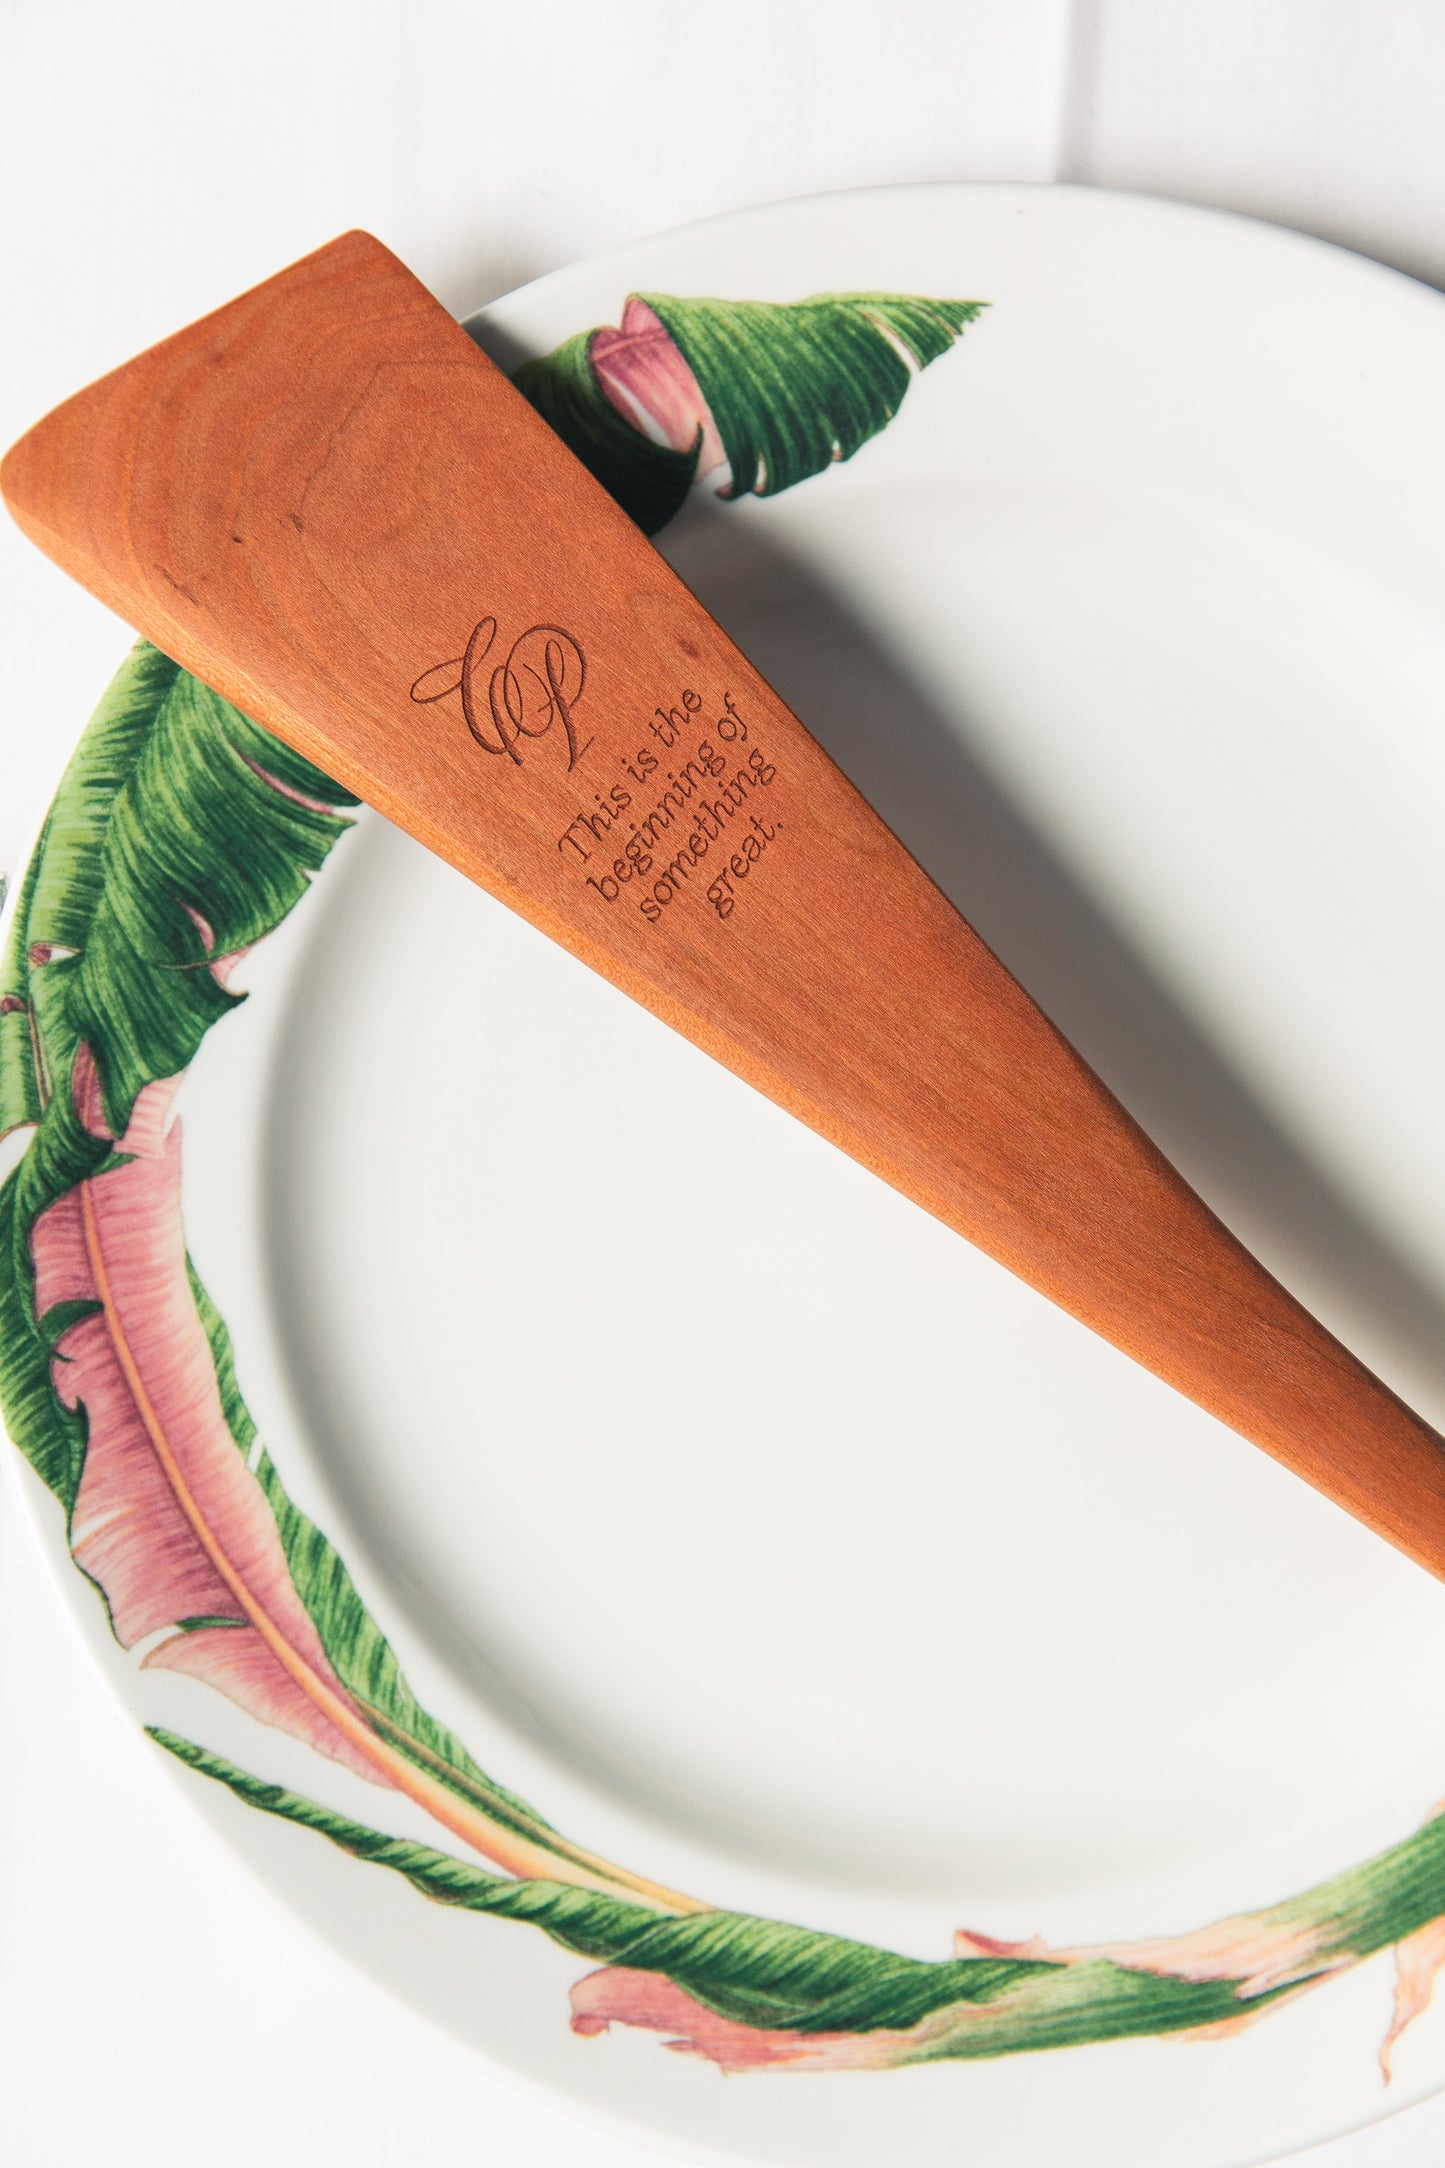 HAND-CRAFTED CHERRY WOOD ROUX SPOON